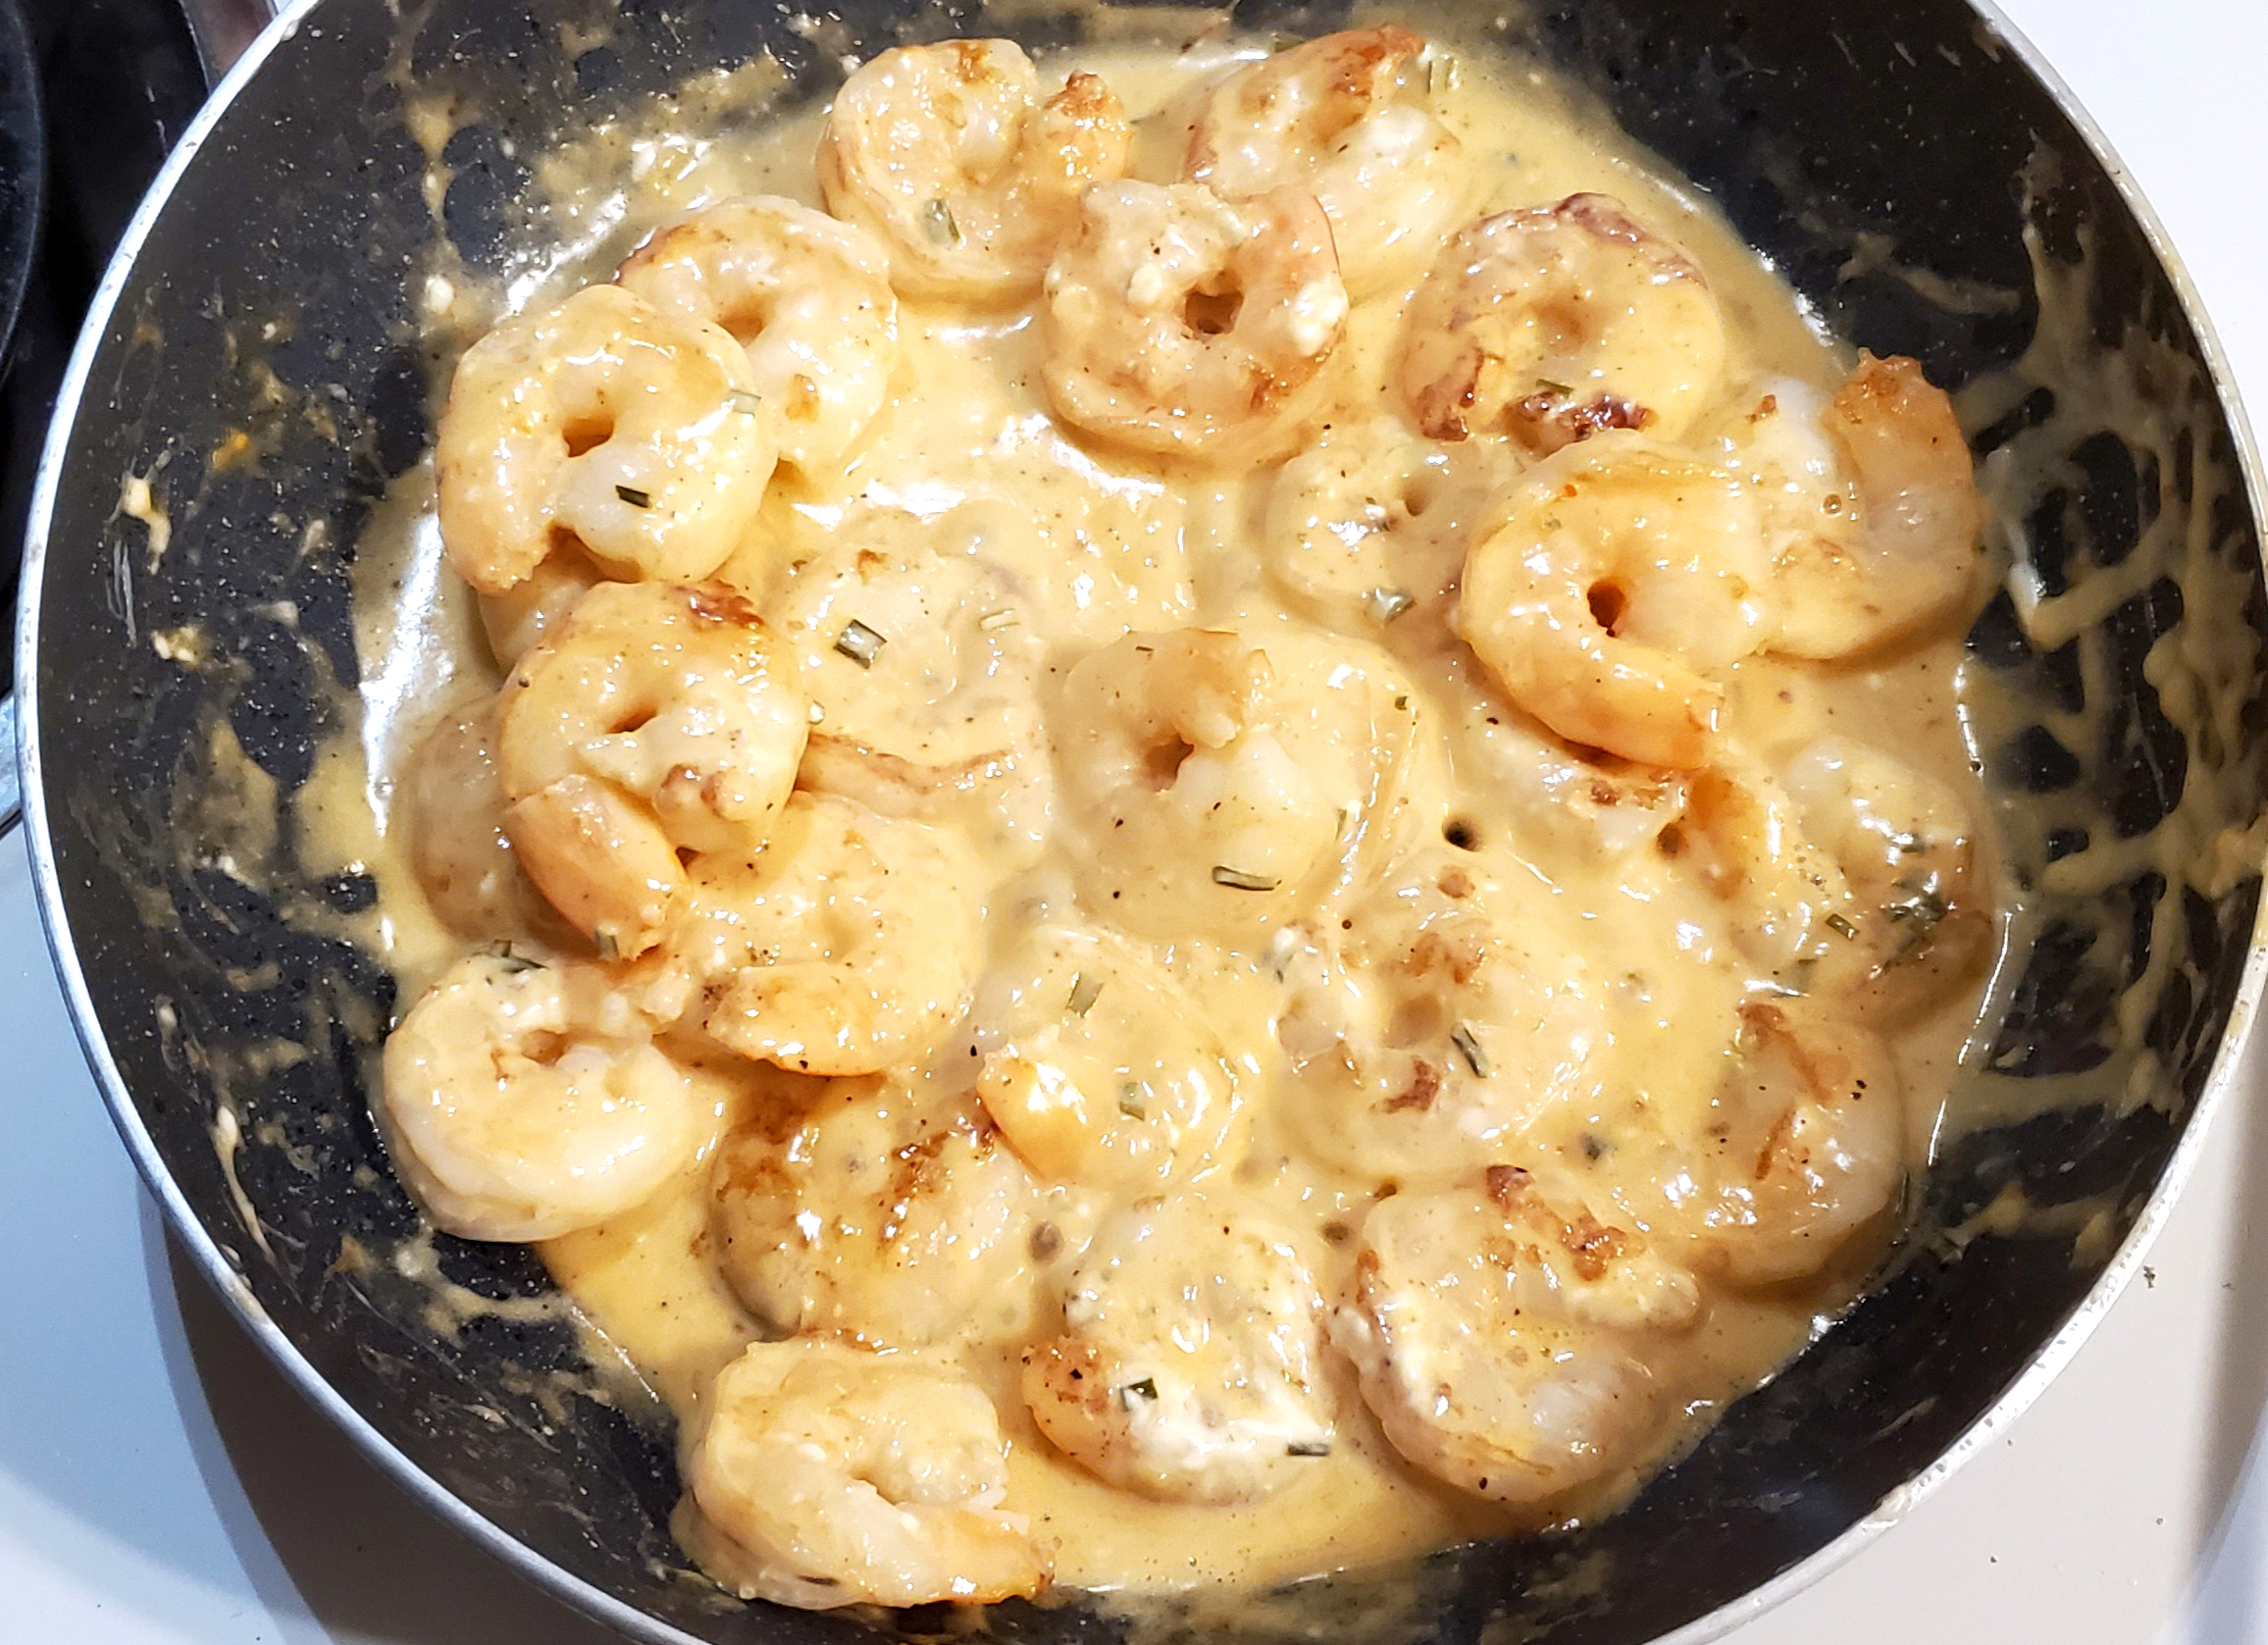 Keto Spicy Cream Sauce for Seafood